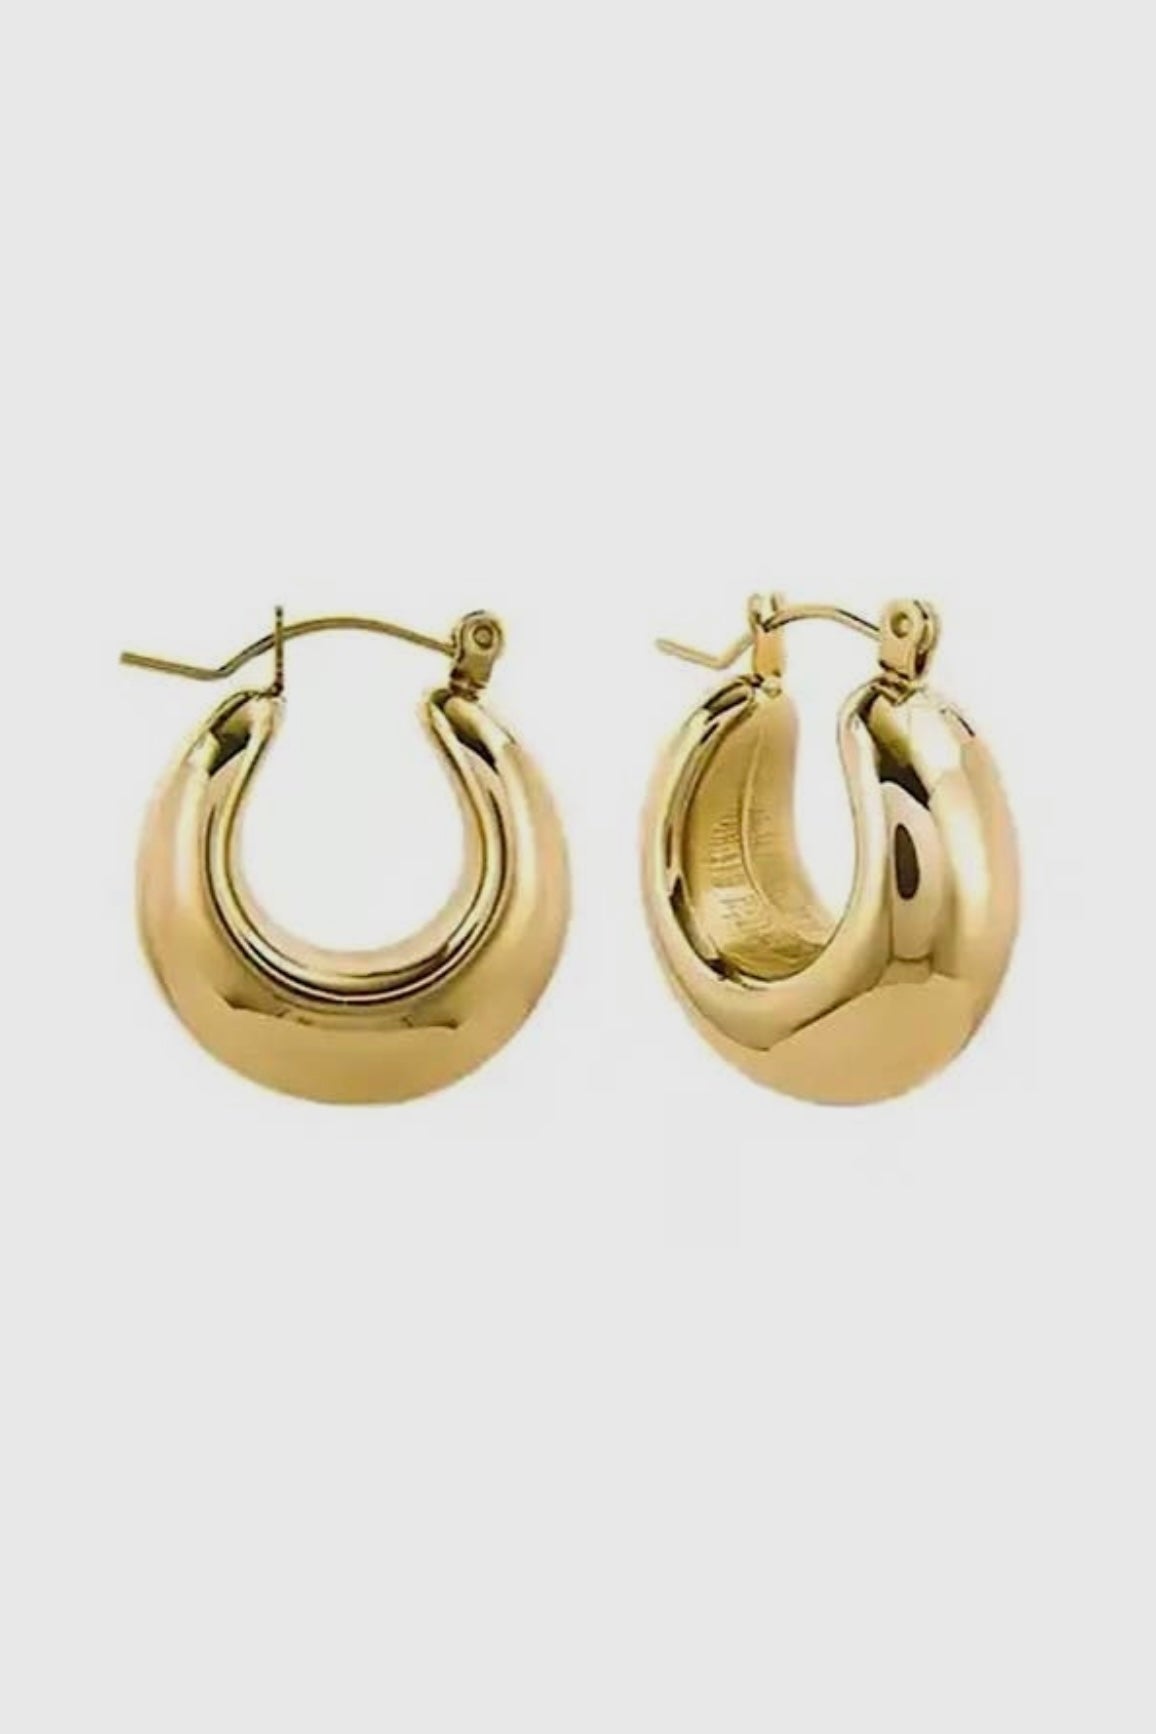 The classic gold hoop has gotten an upgrade, but still boasts all the same style you love! Pair with anything from everyday casual looks to more dressed up statement looks!